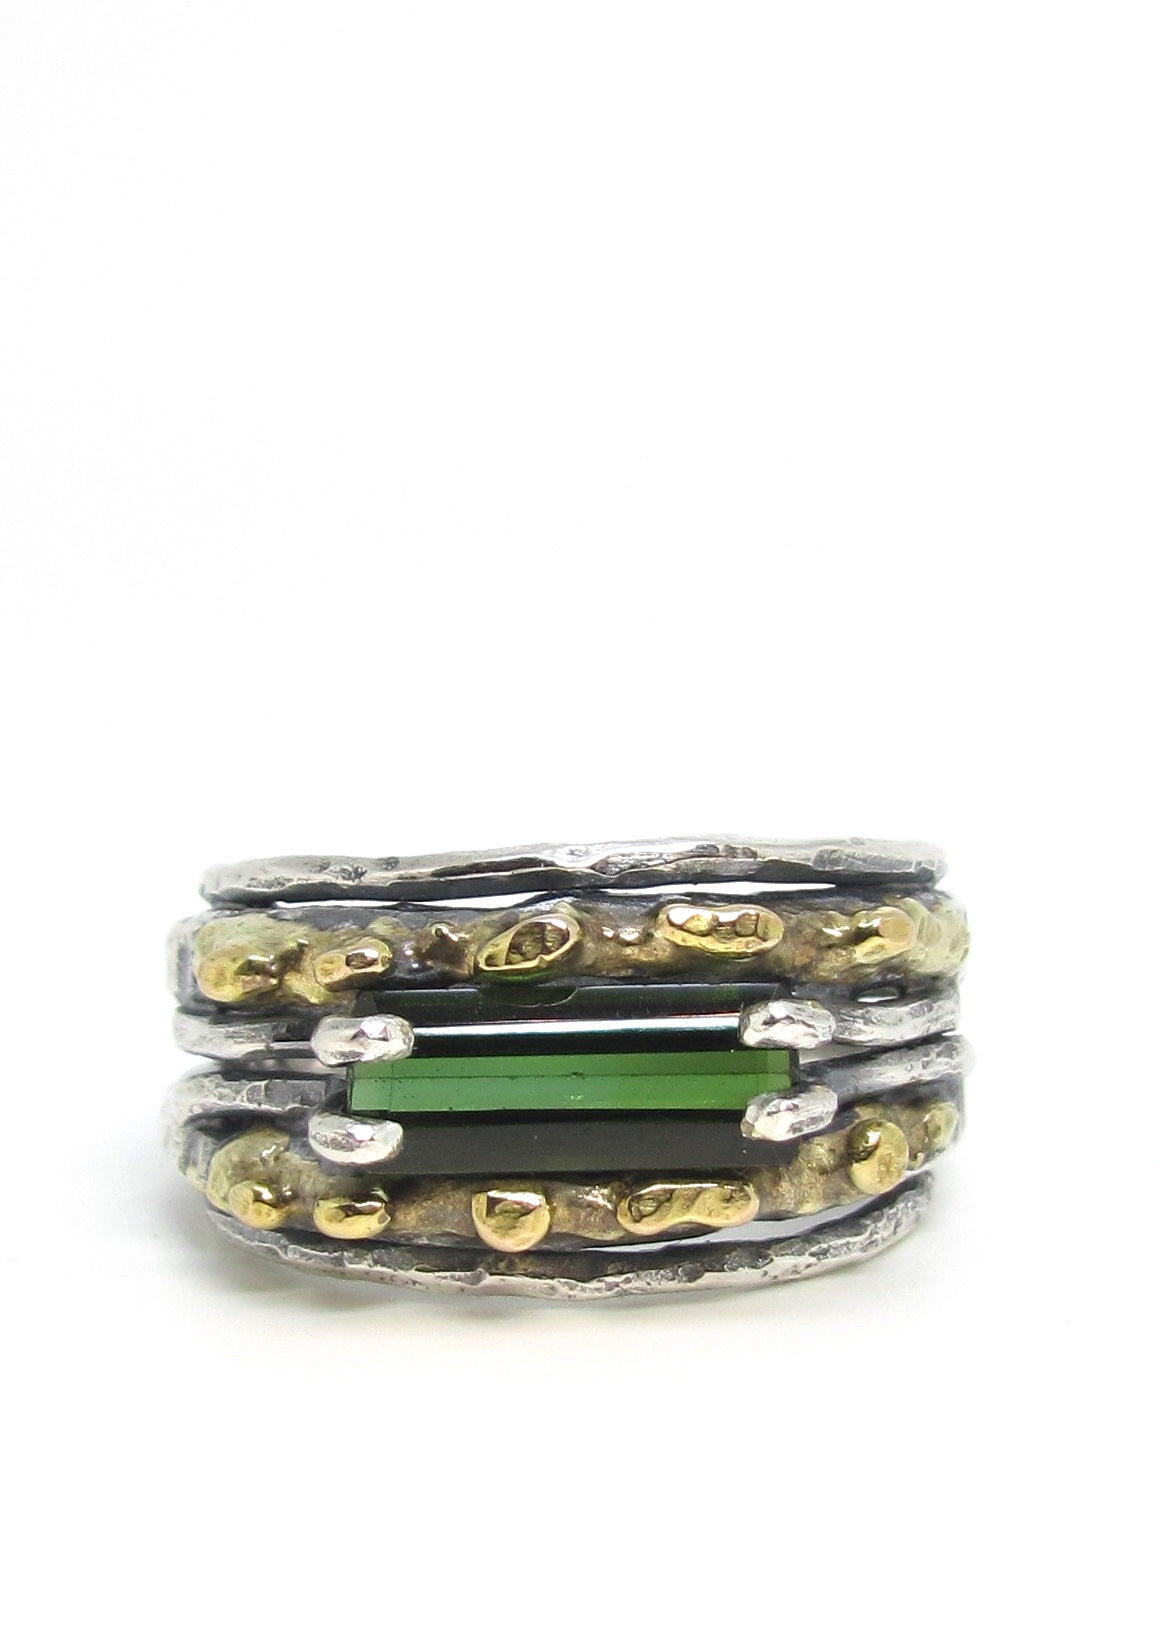 Embedded Tourmaline Ring with Hammered 14K Gold